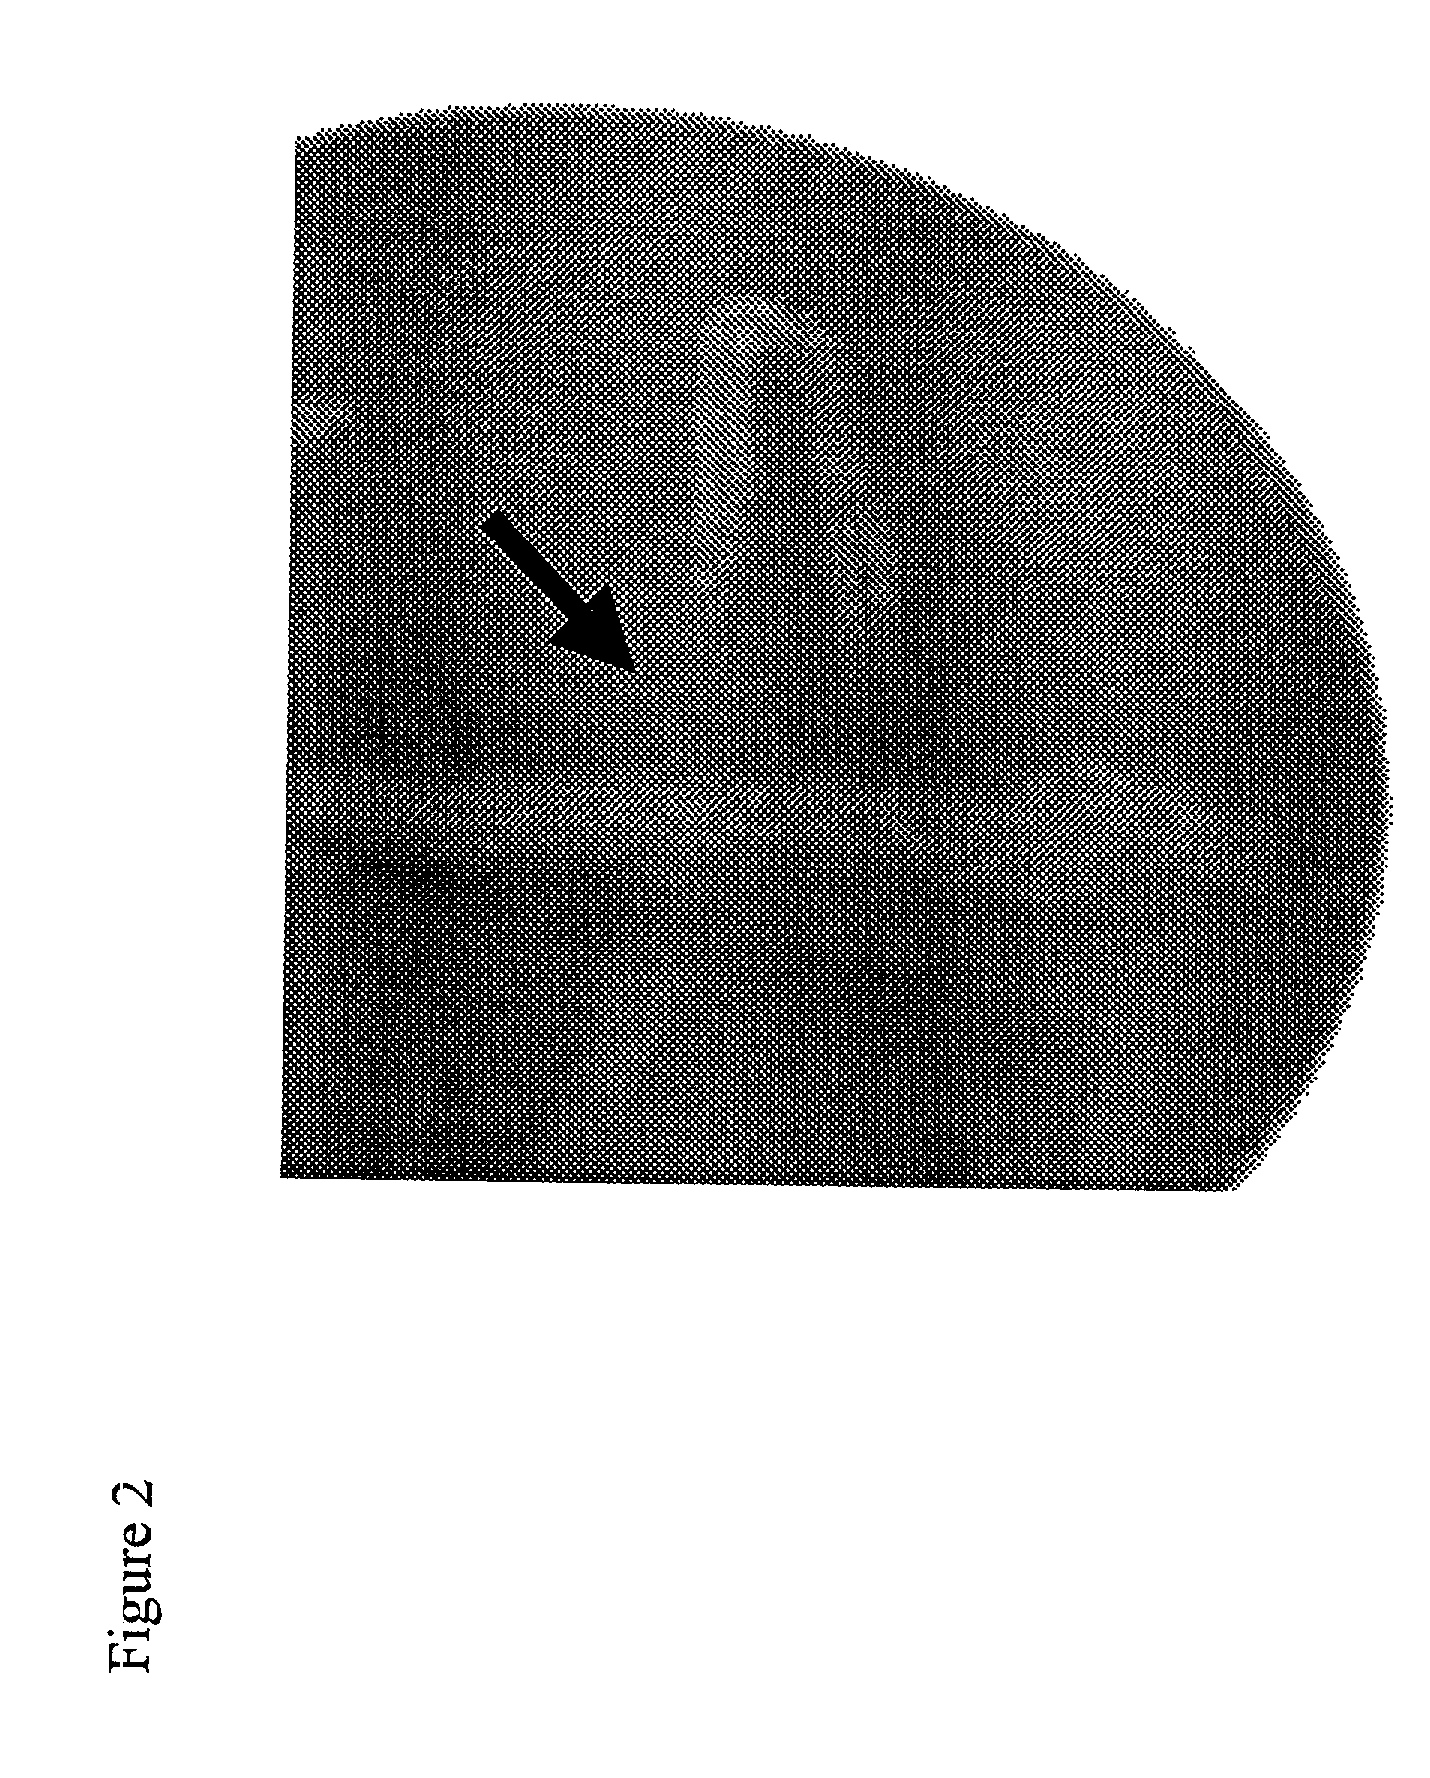 Method for the production of bacterial toxins